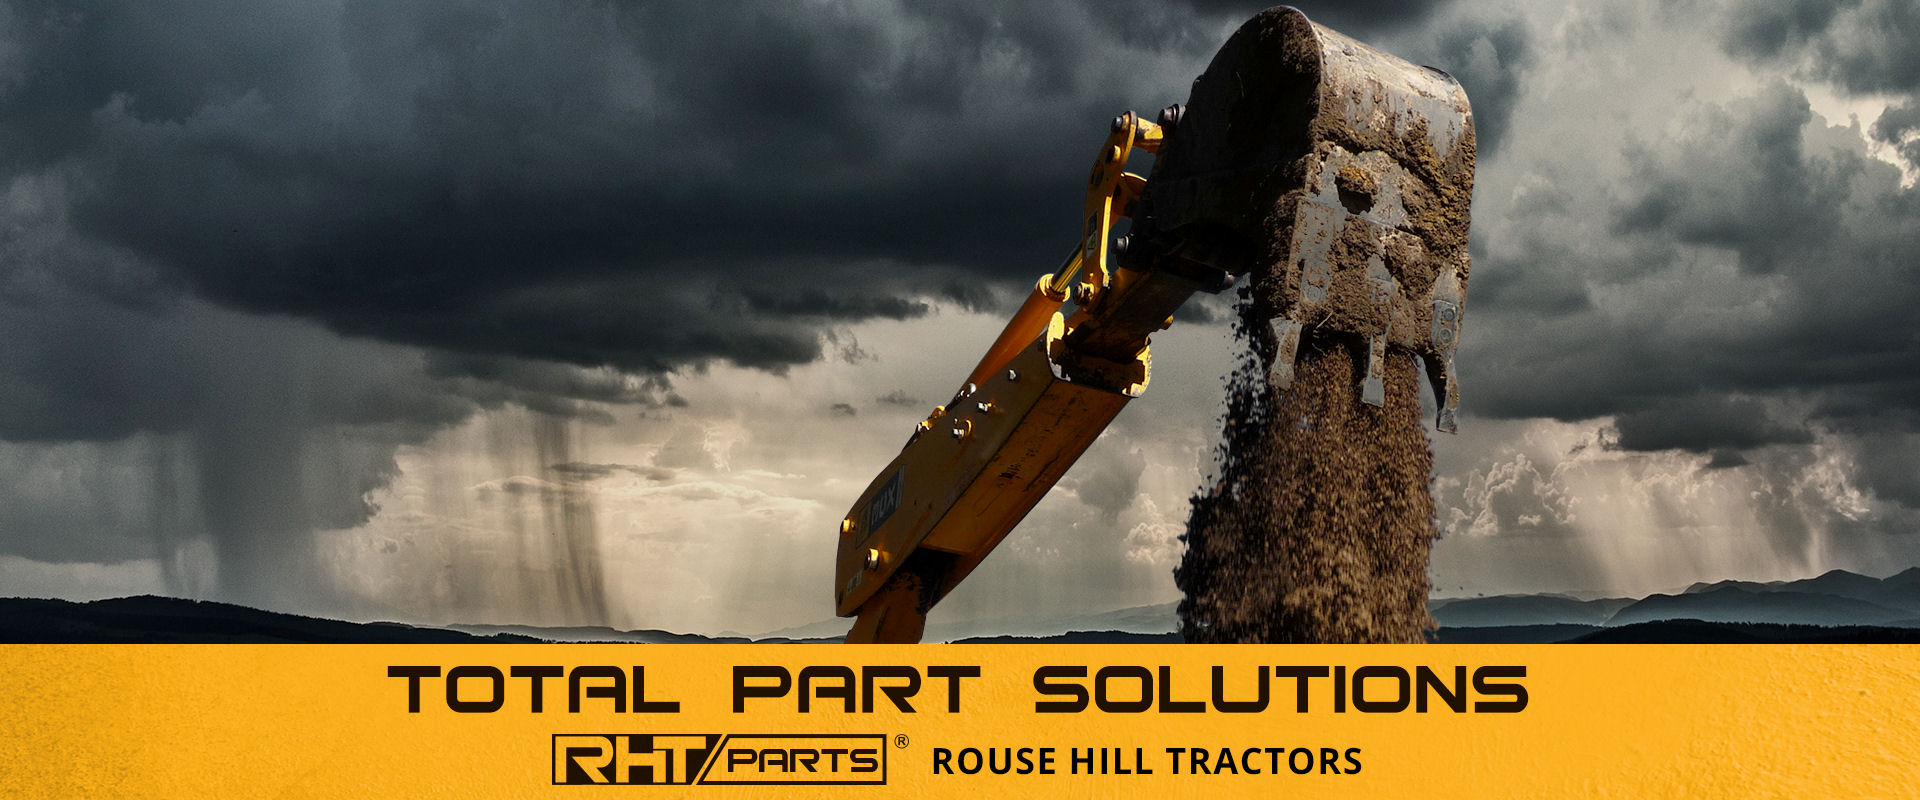 Rouse Hill Tractors